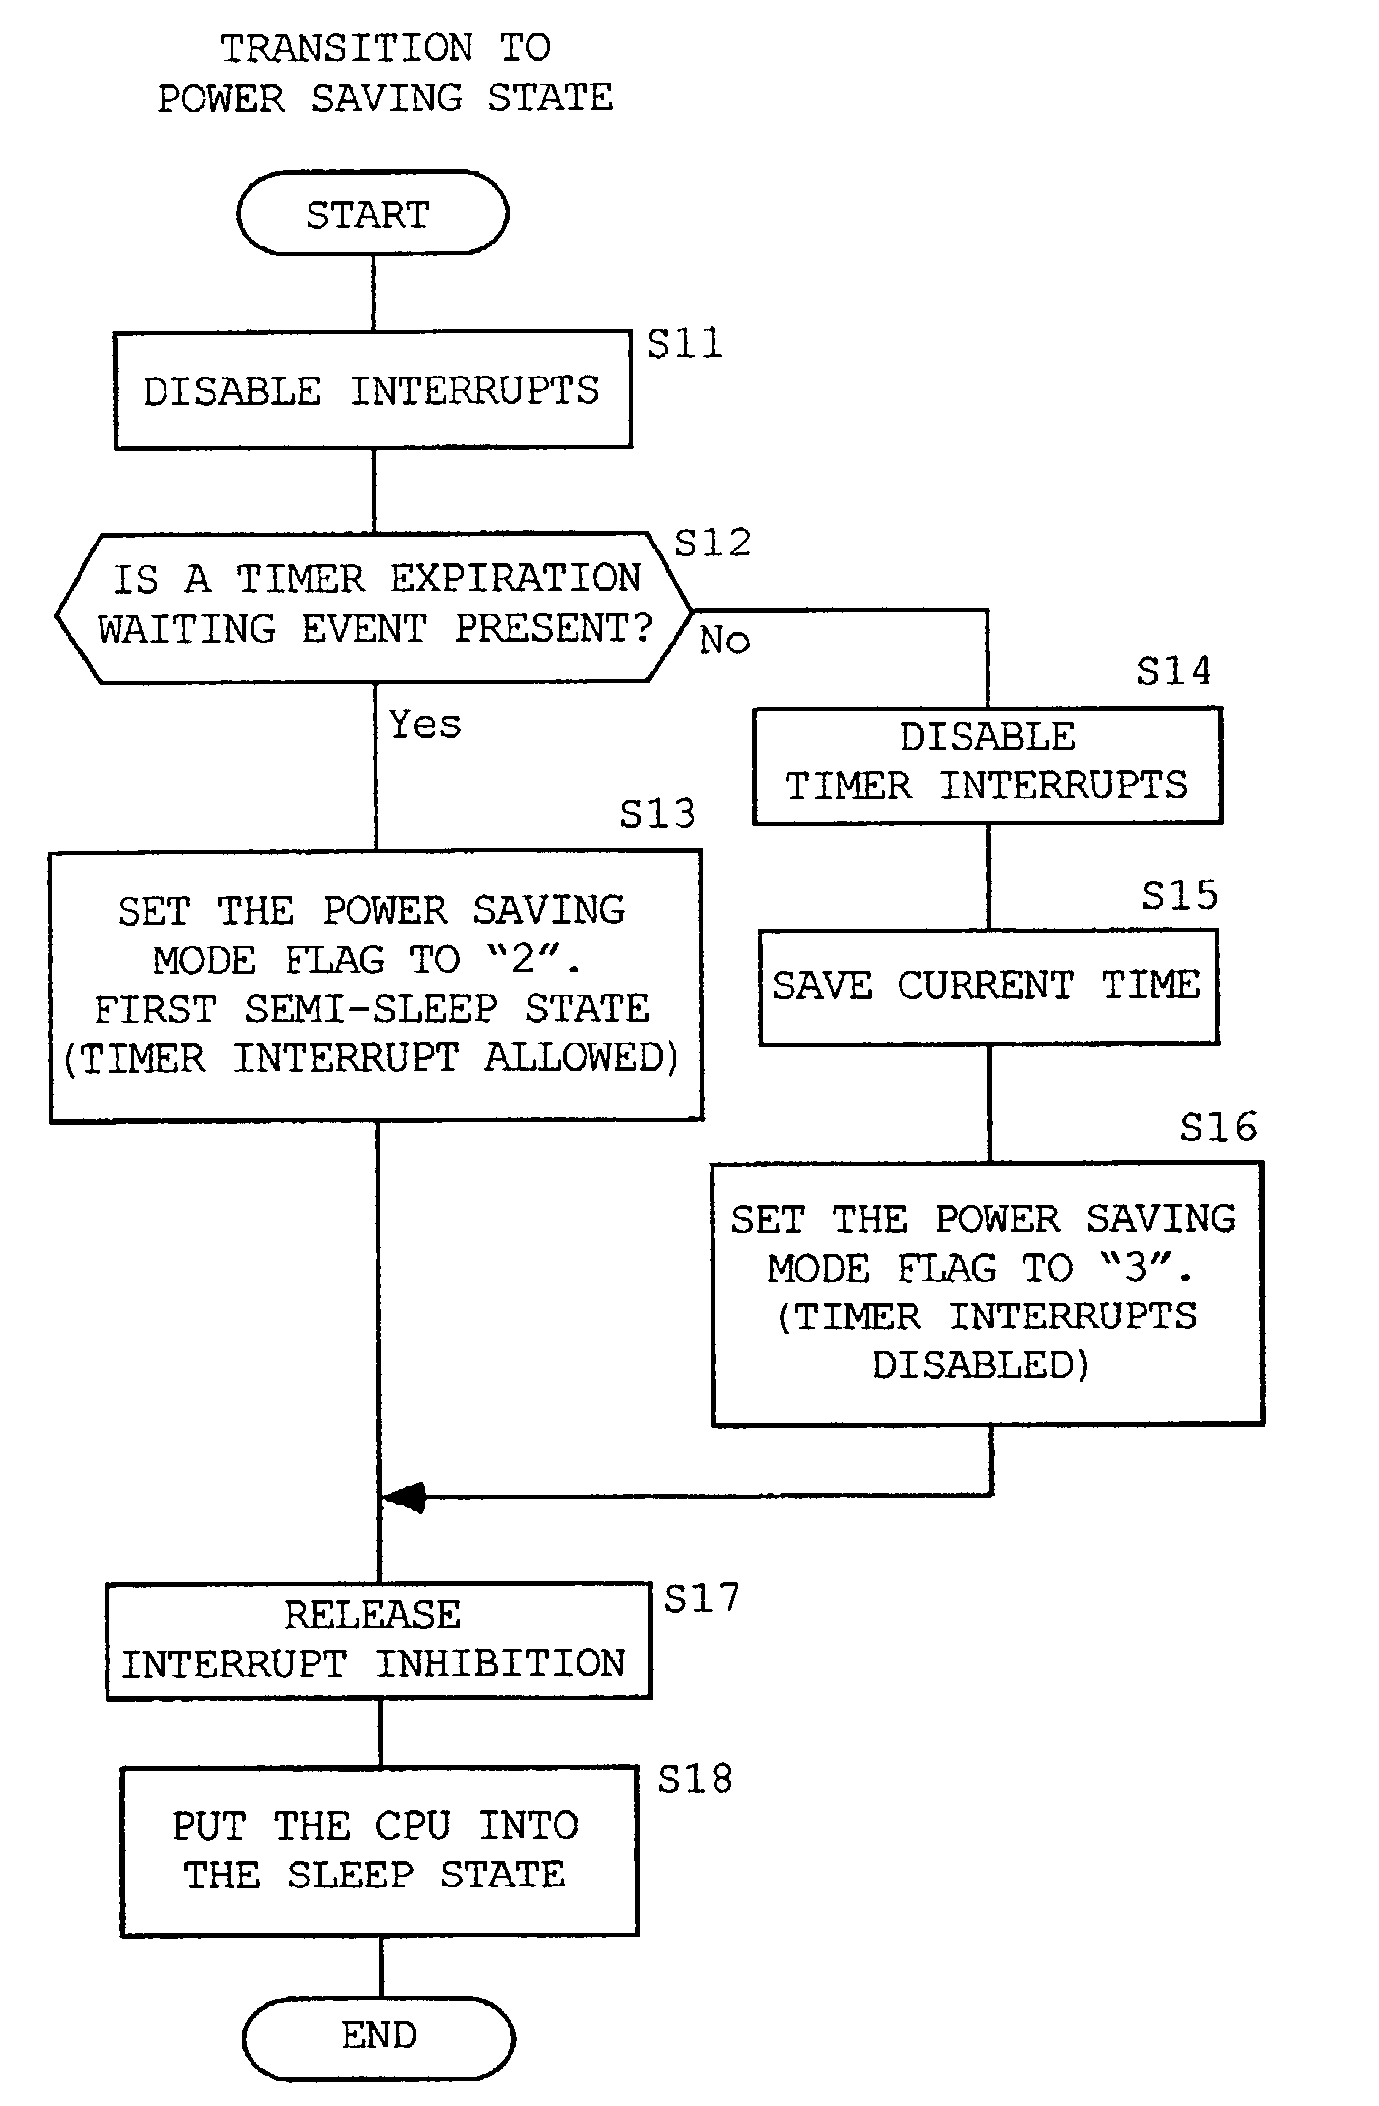 System and method for switching a computer system to a first or second power saving mode based on whether or not there exists a timer-expiration-waiting event in an event queue